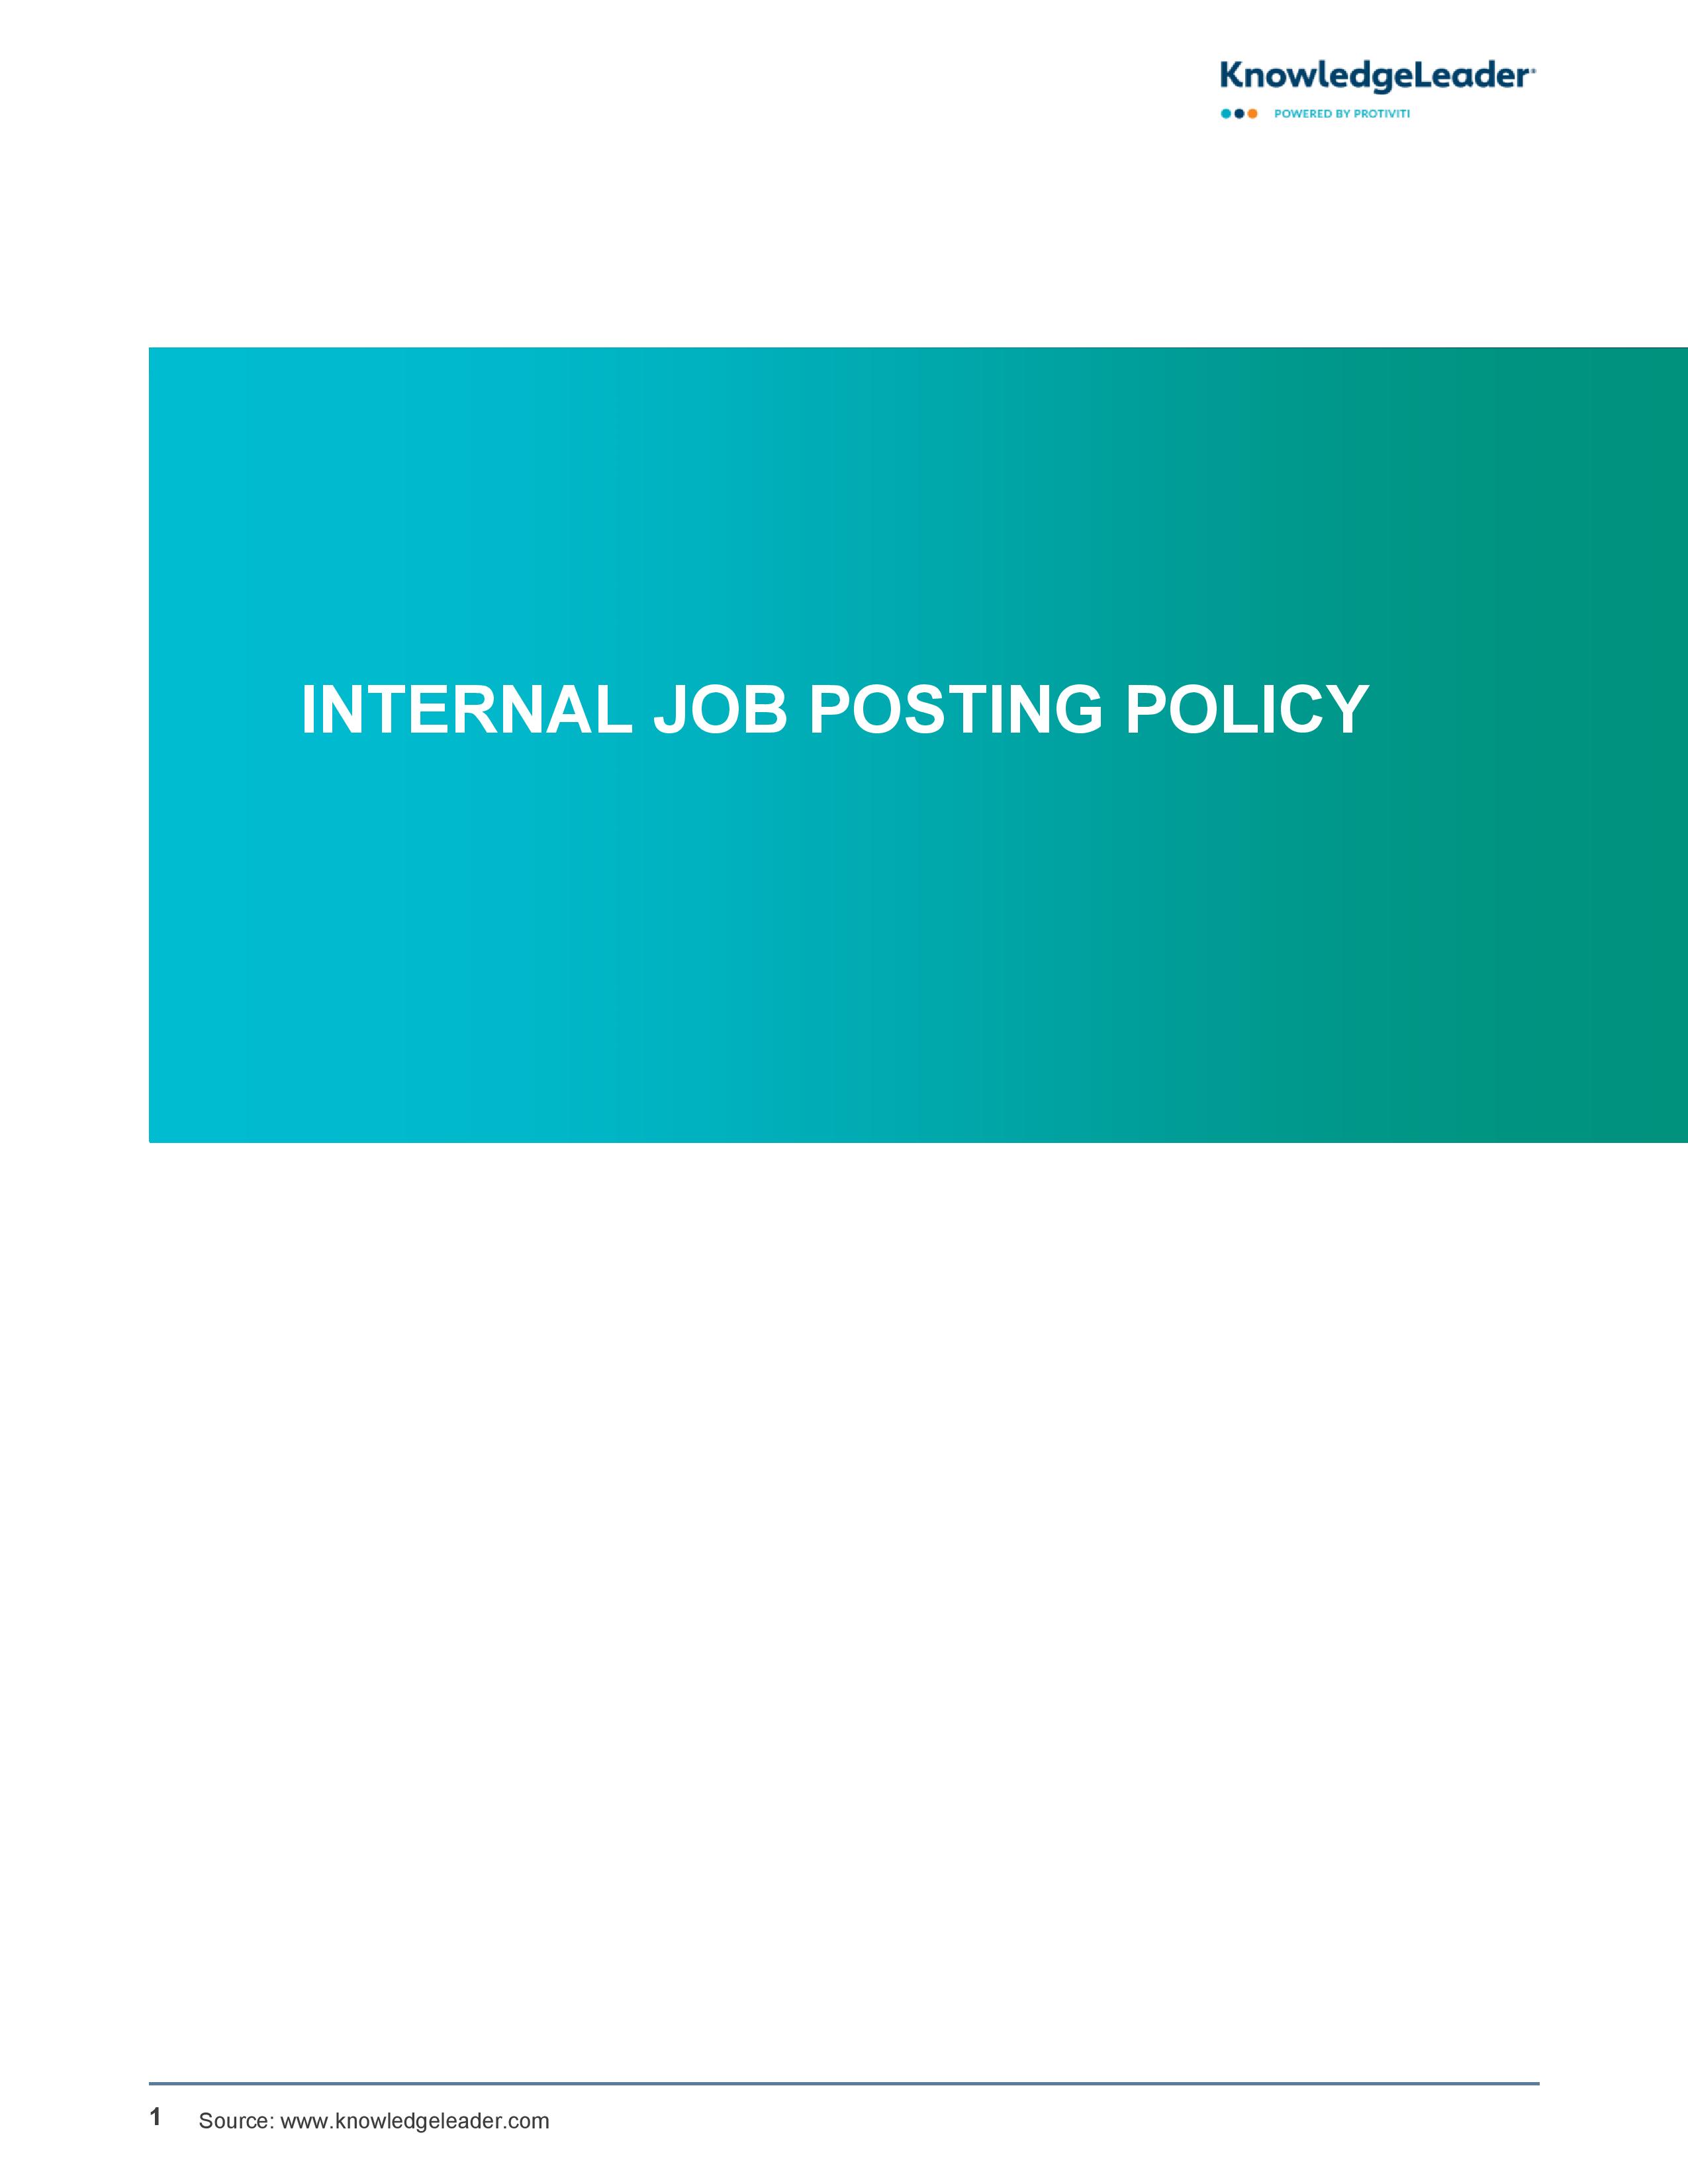 Screenshot of the first page of Internal Job Posting Policy